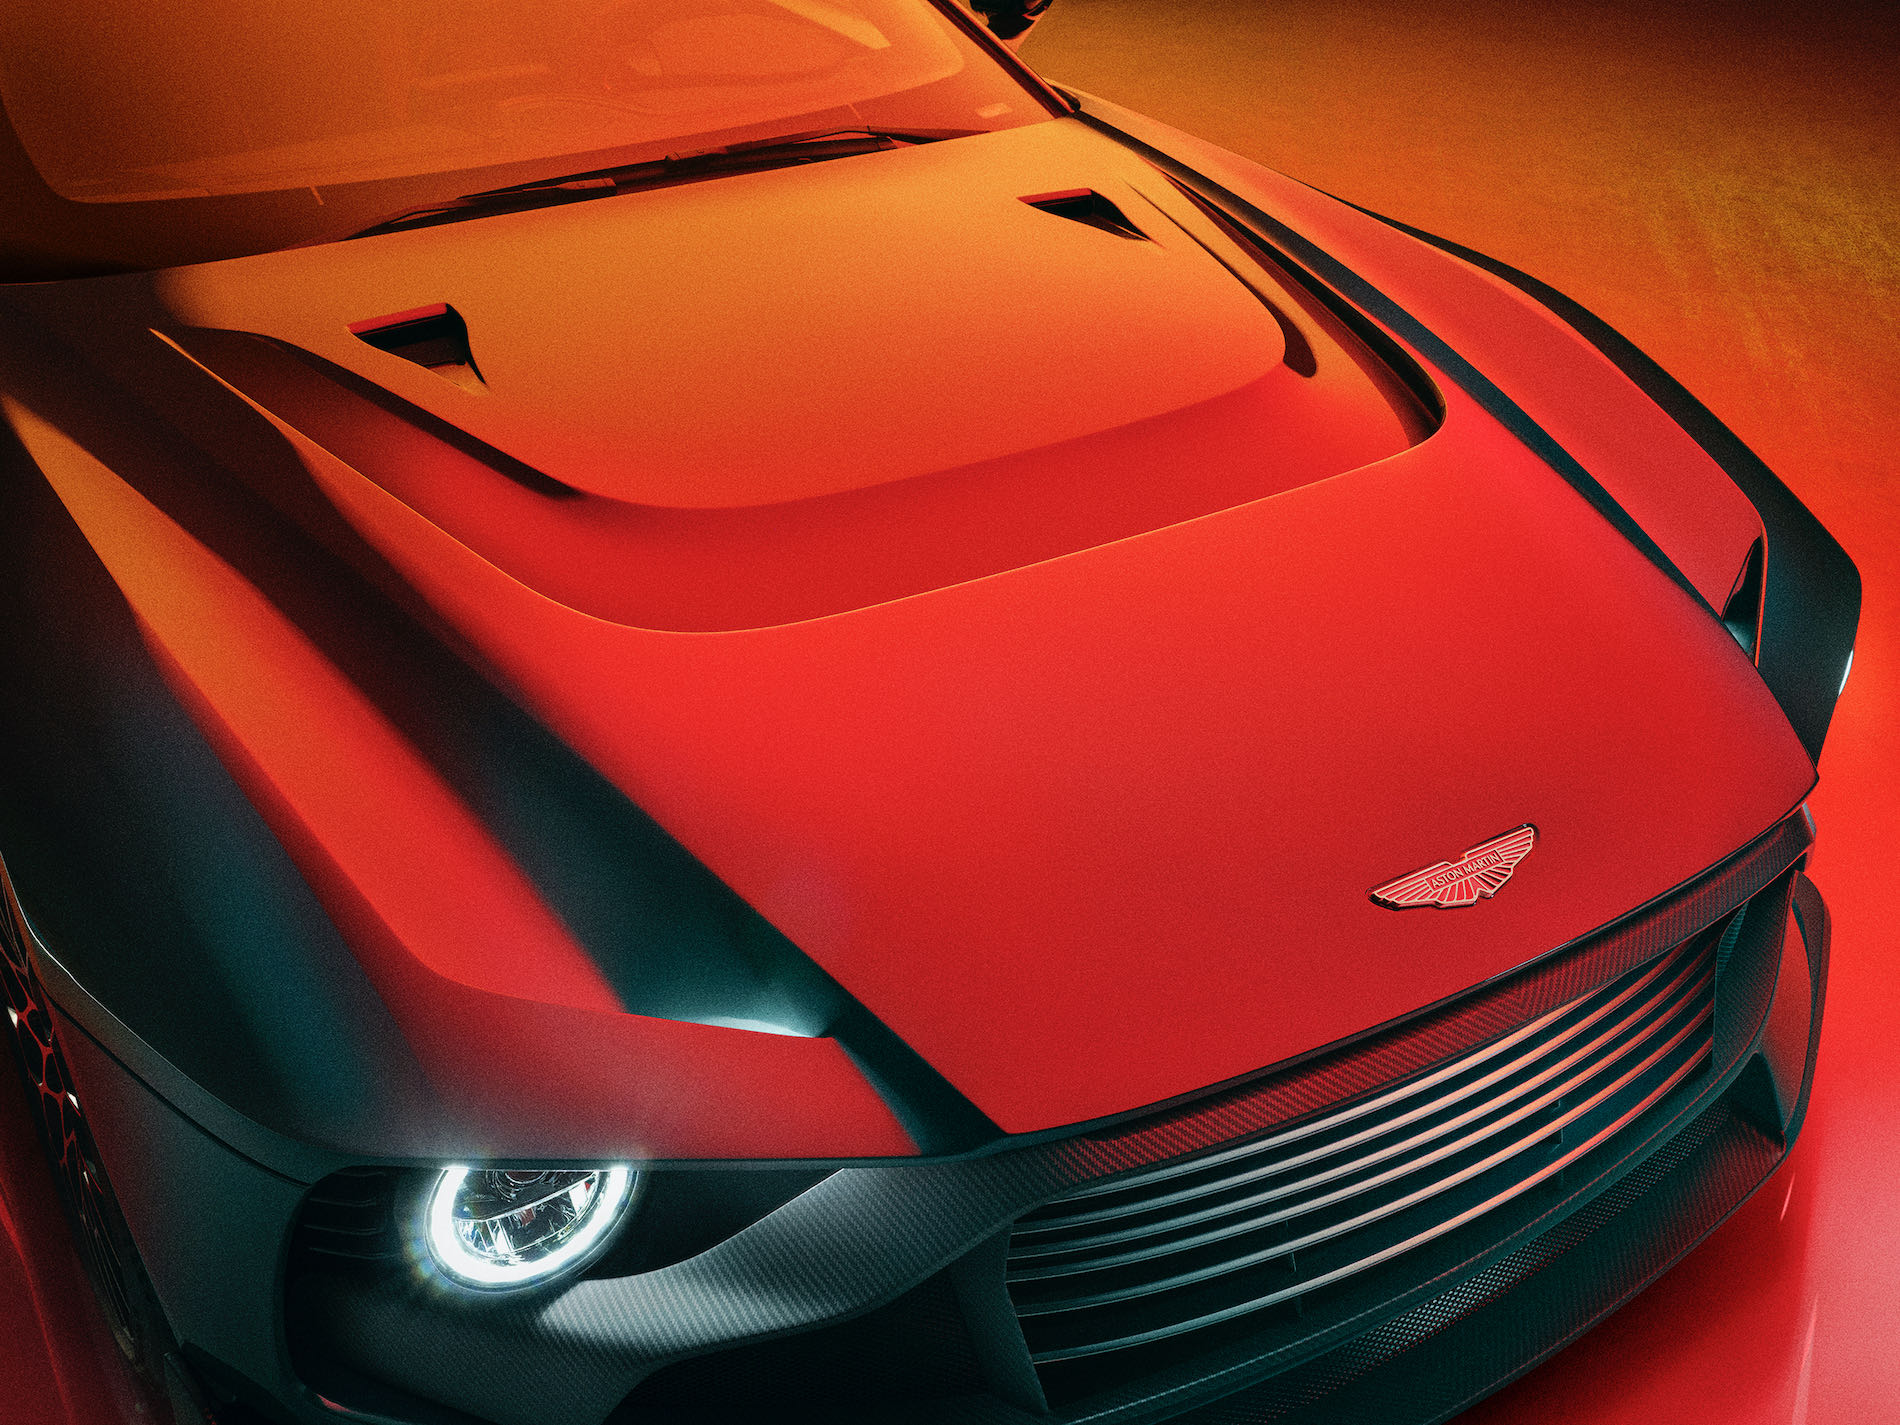 Aston Martin To Mark 110th Anniversary With Limited-Run Special Car